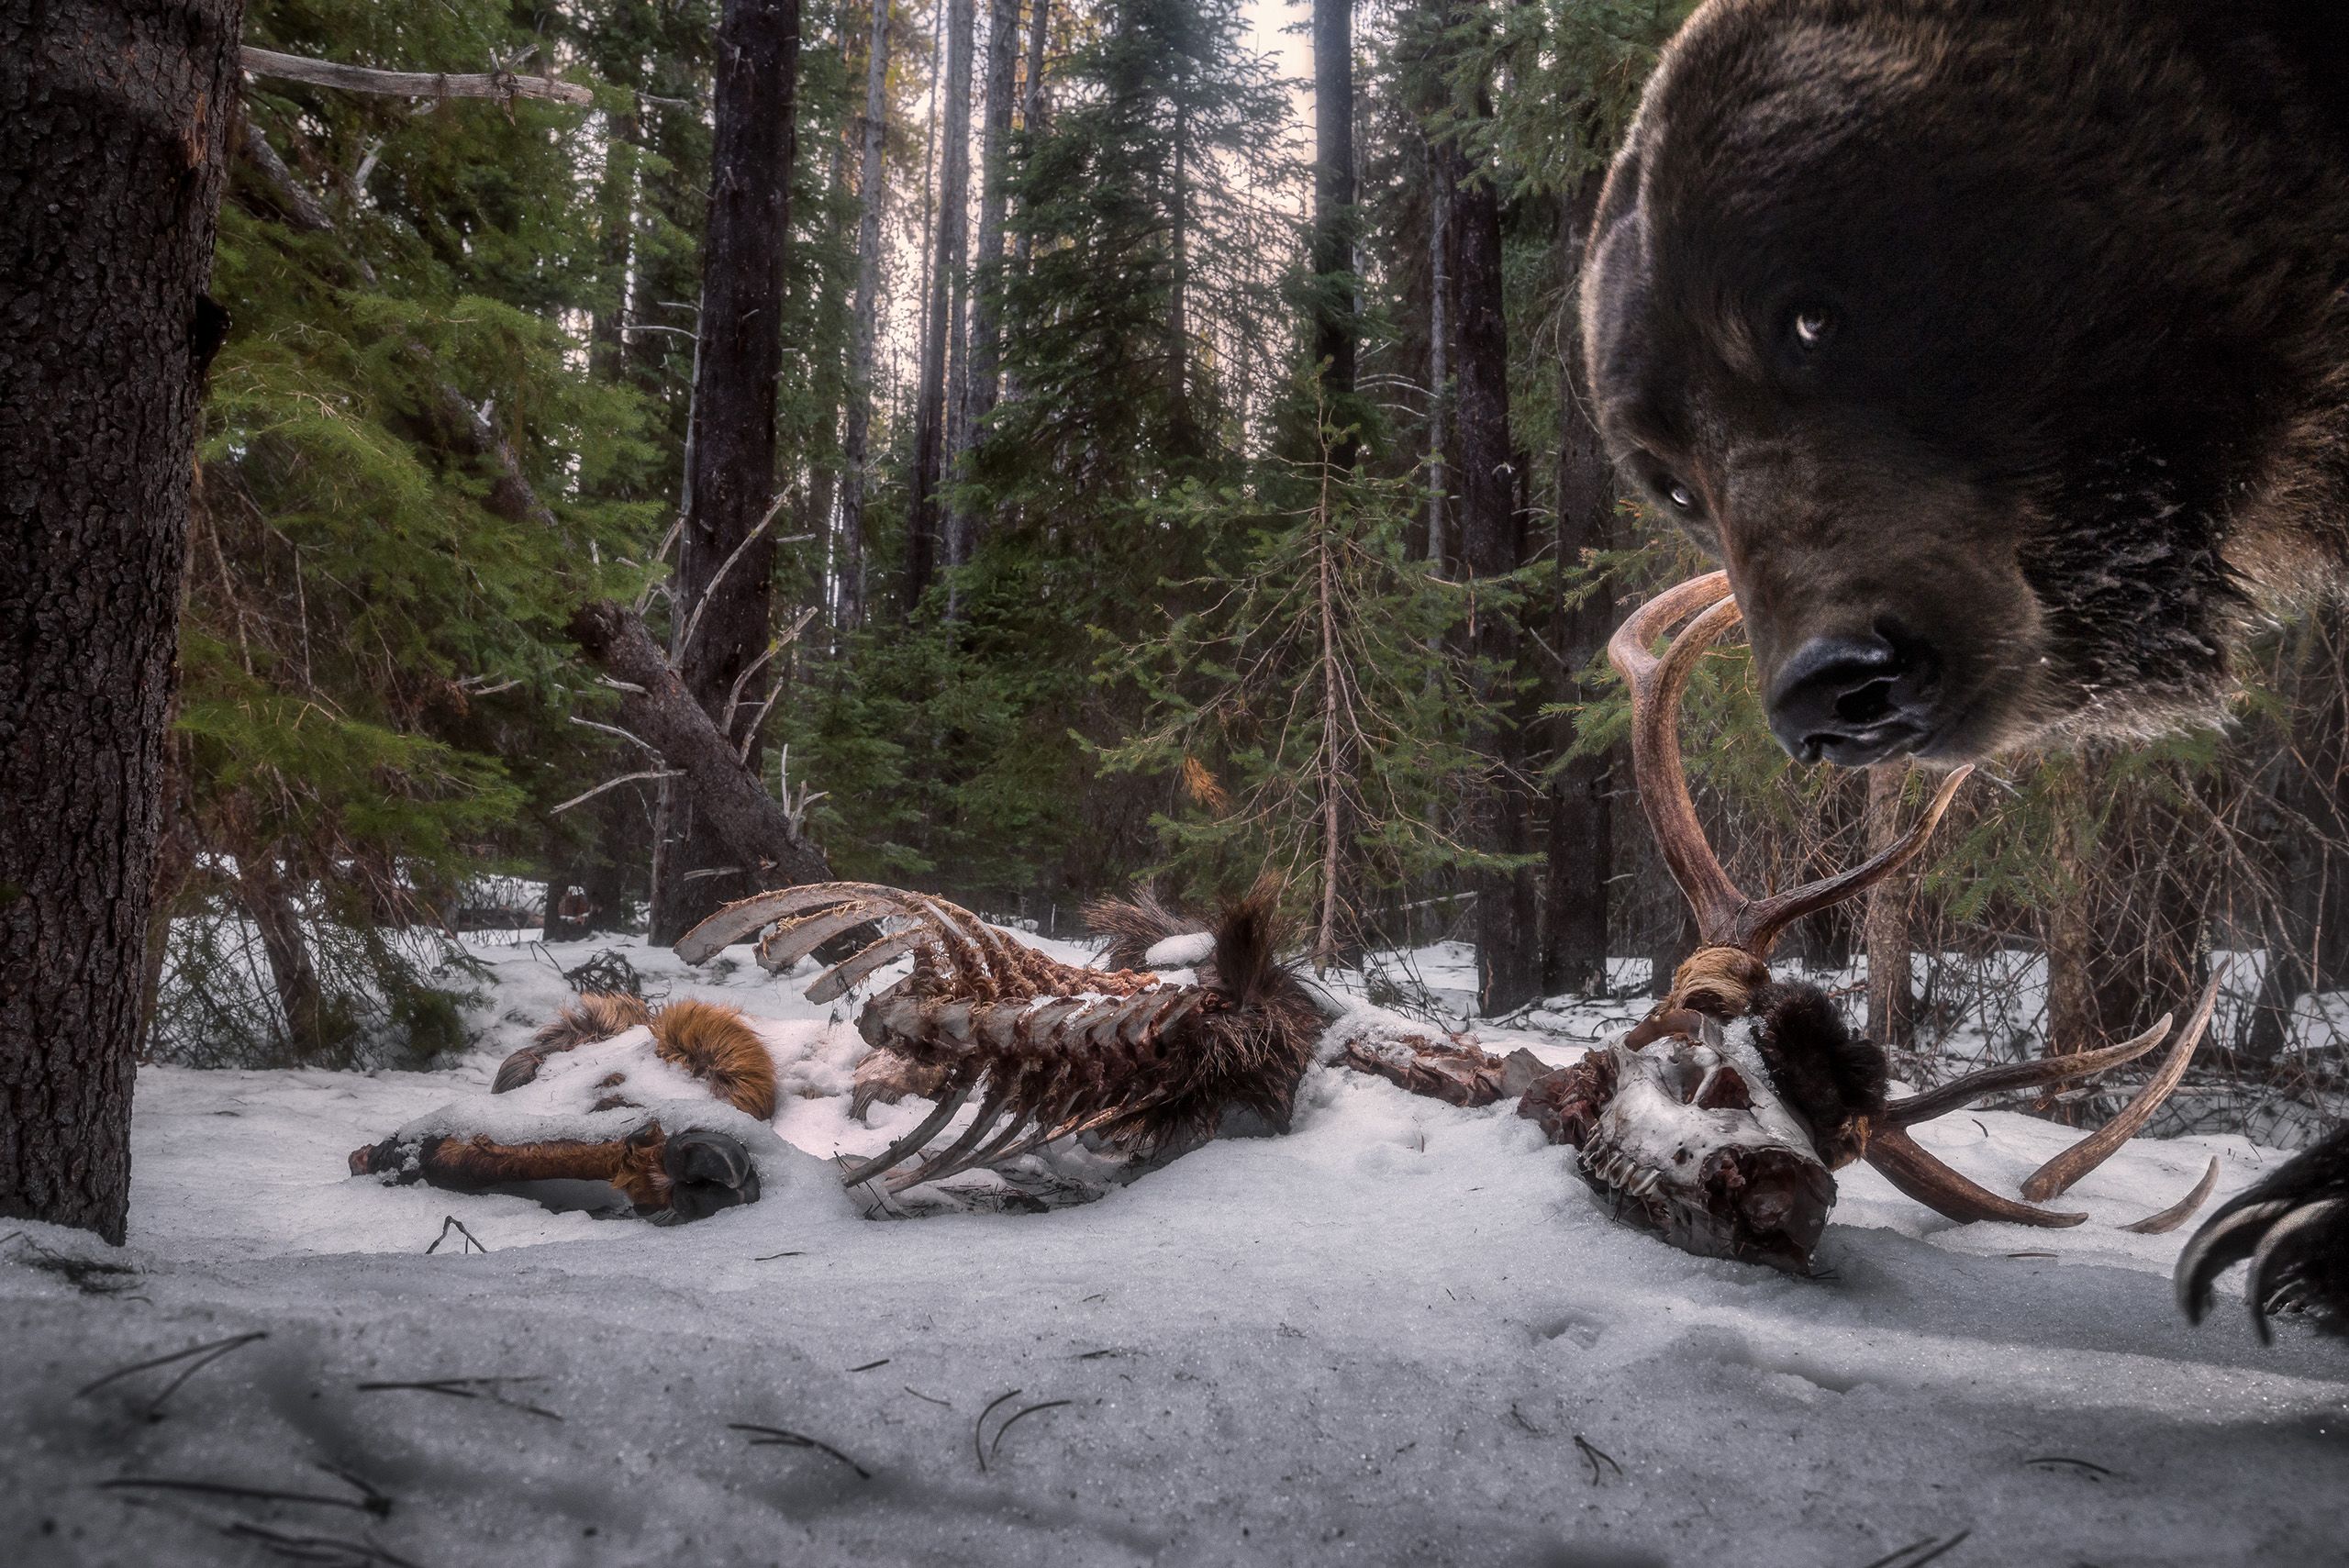 A grizzly bear walking past the remains of a dead elk looking into the camera